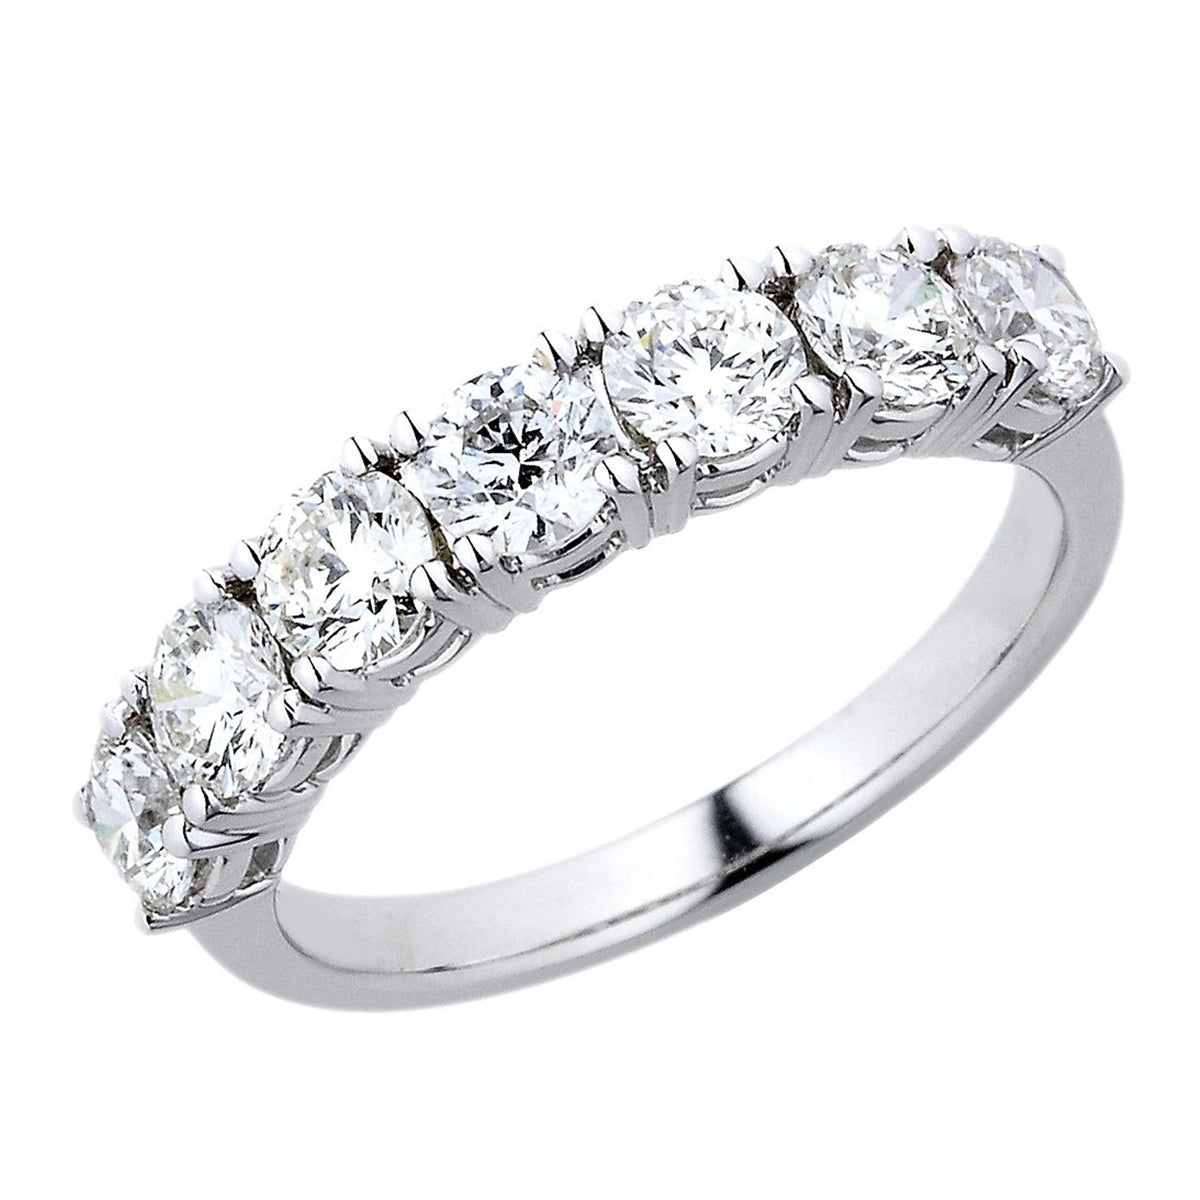 18Kt White Gold Prong Set Wedding Ring With 1.69cttw Natural Diamonds